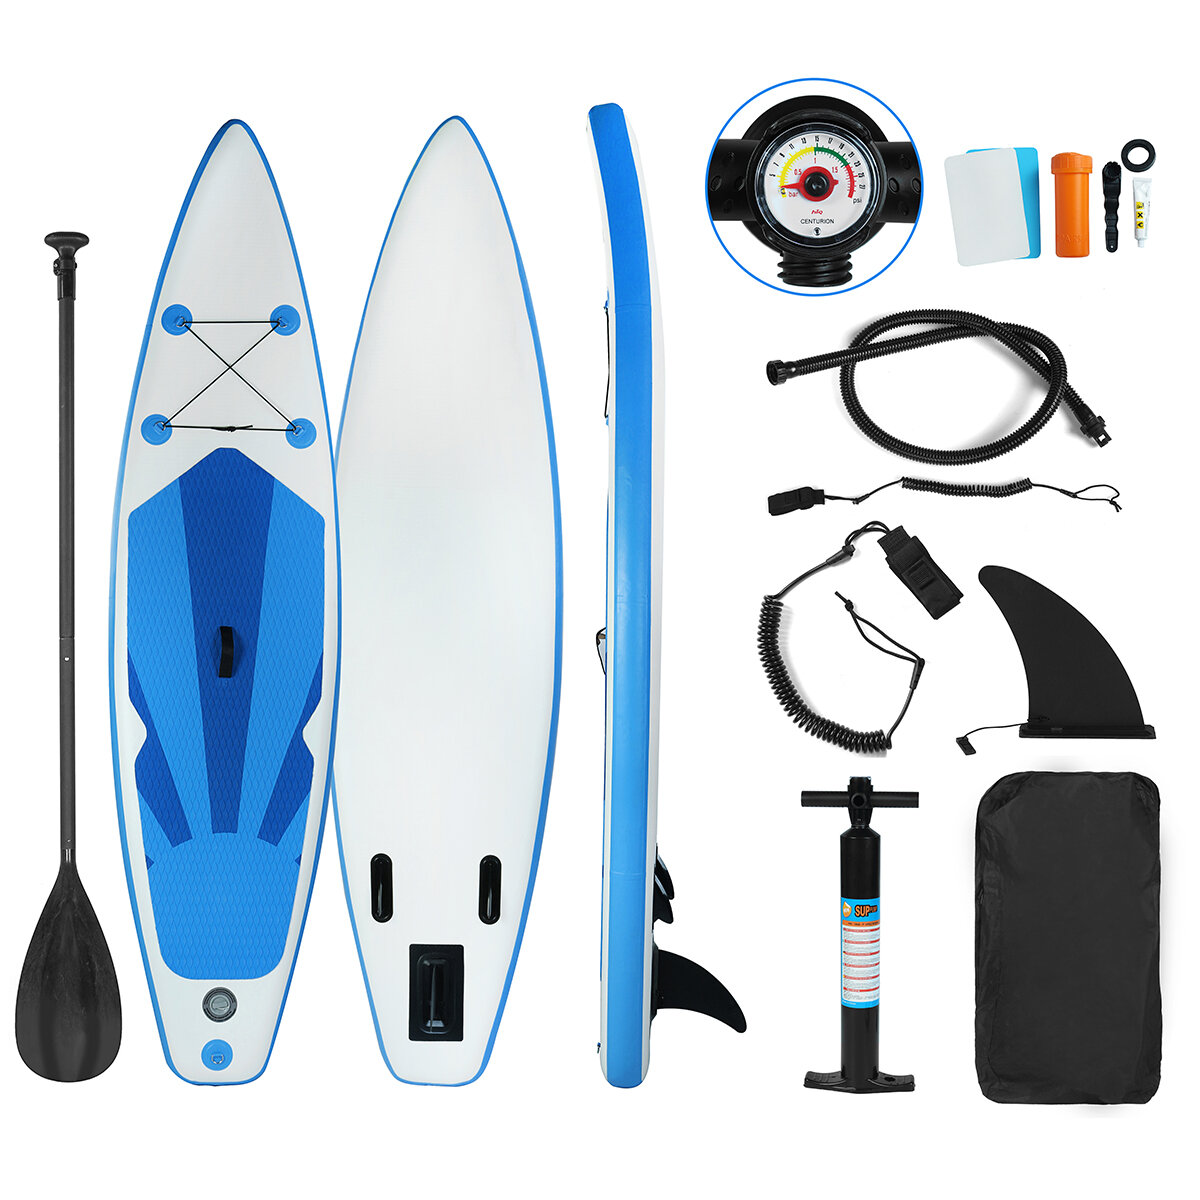 

10ft Inflatable Stand Up Paddle Board Non-slip Surfboard Surfing Board Water Sport Surfing Surfboard for Adults UK Stock